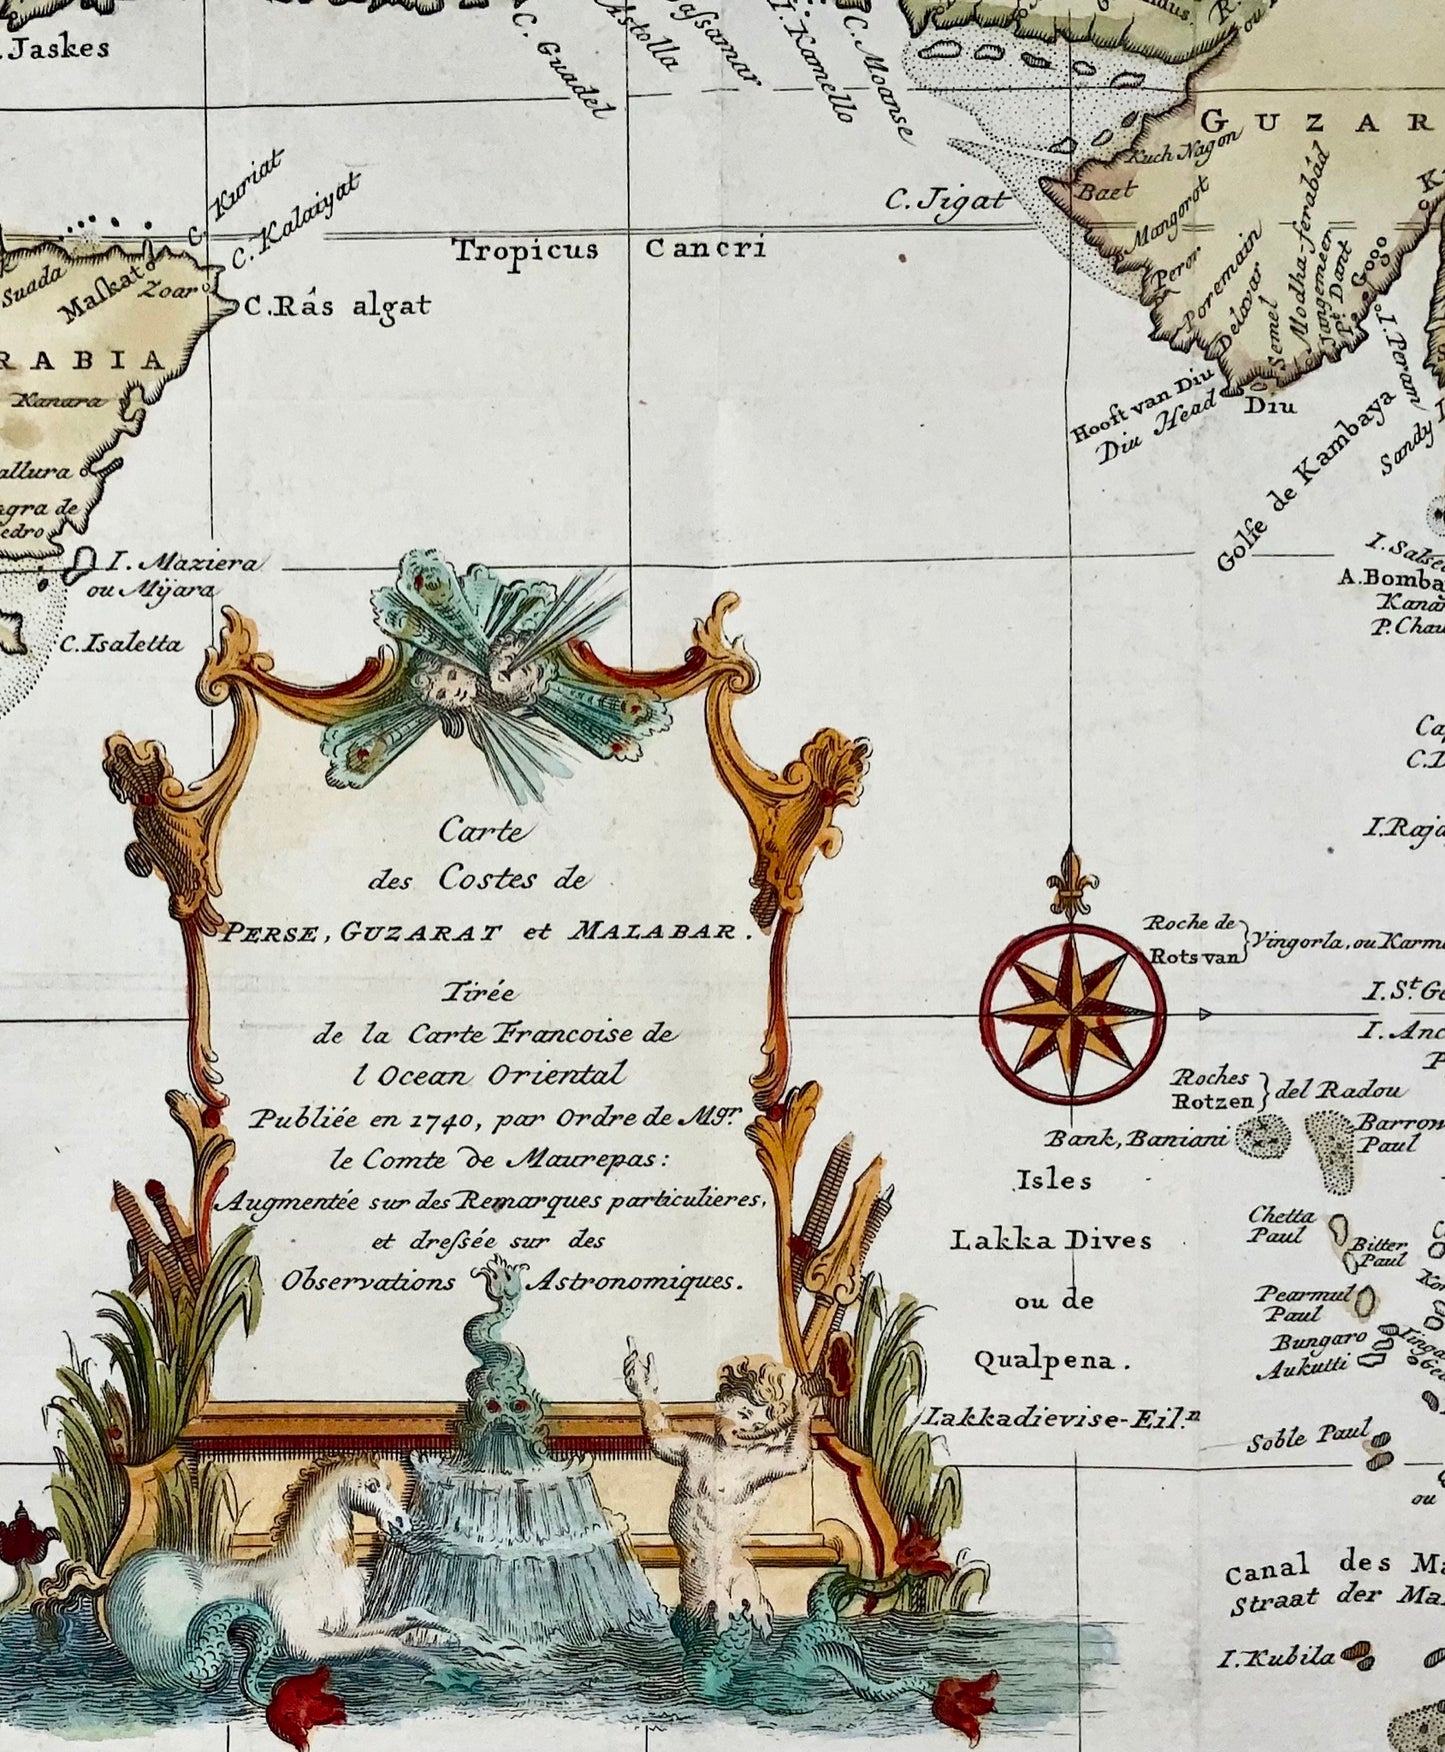 1749 Bellin, Schley, map of Indian Ocean, Maldives, India, Pakistan, Iran, foreign topography